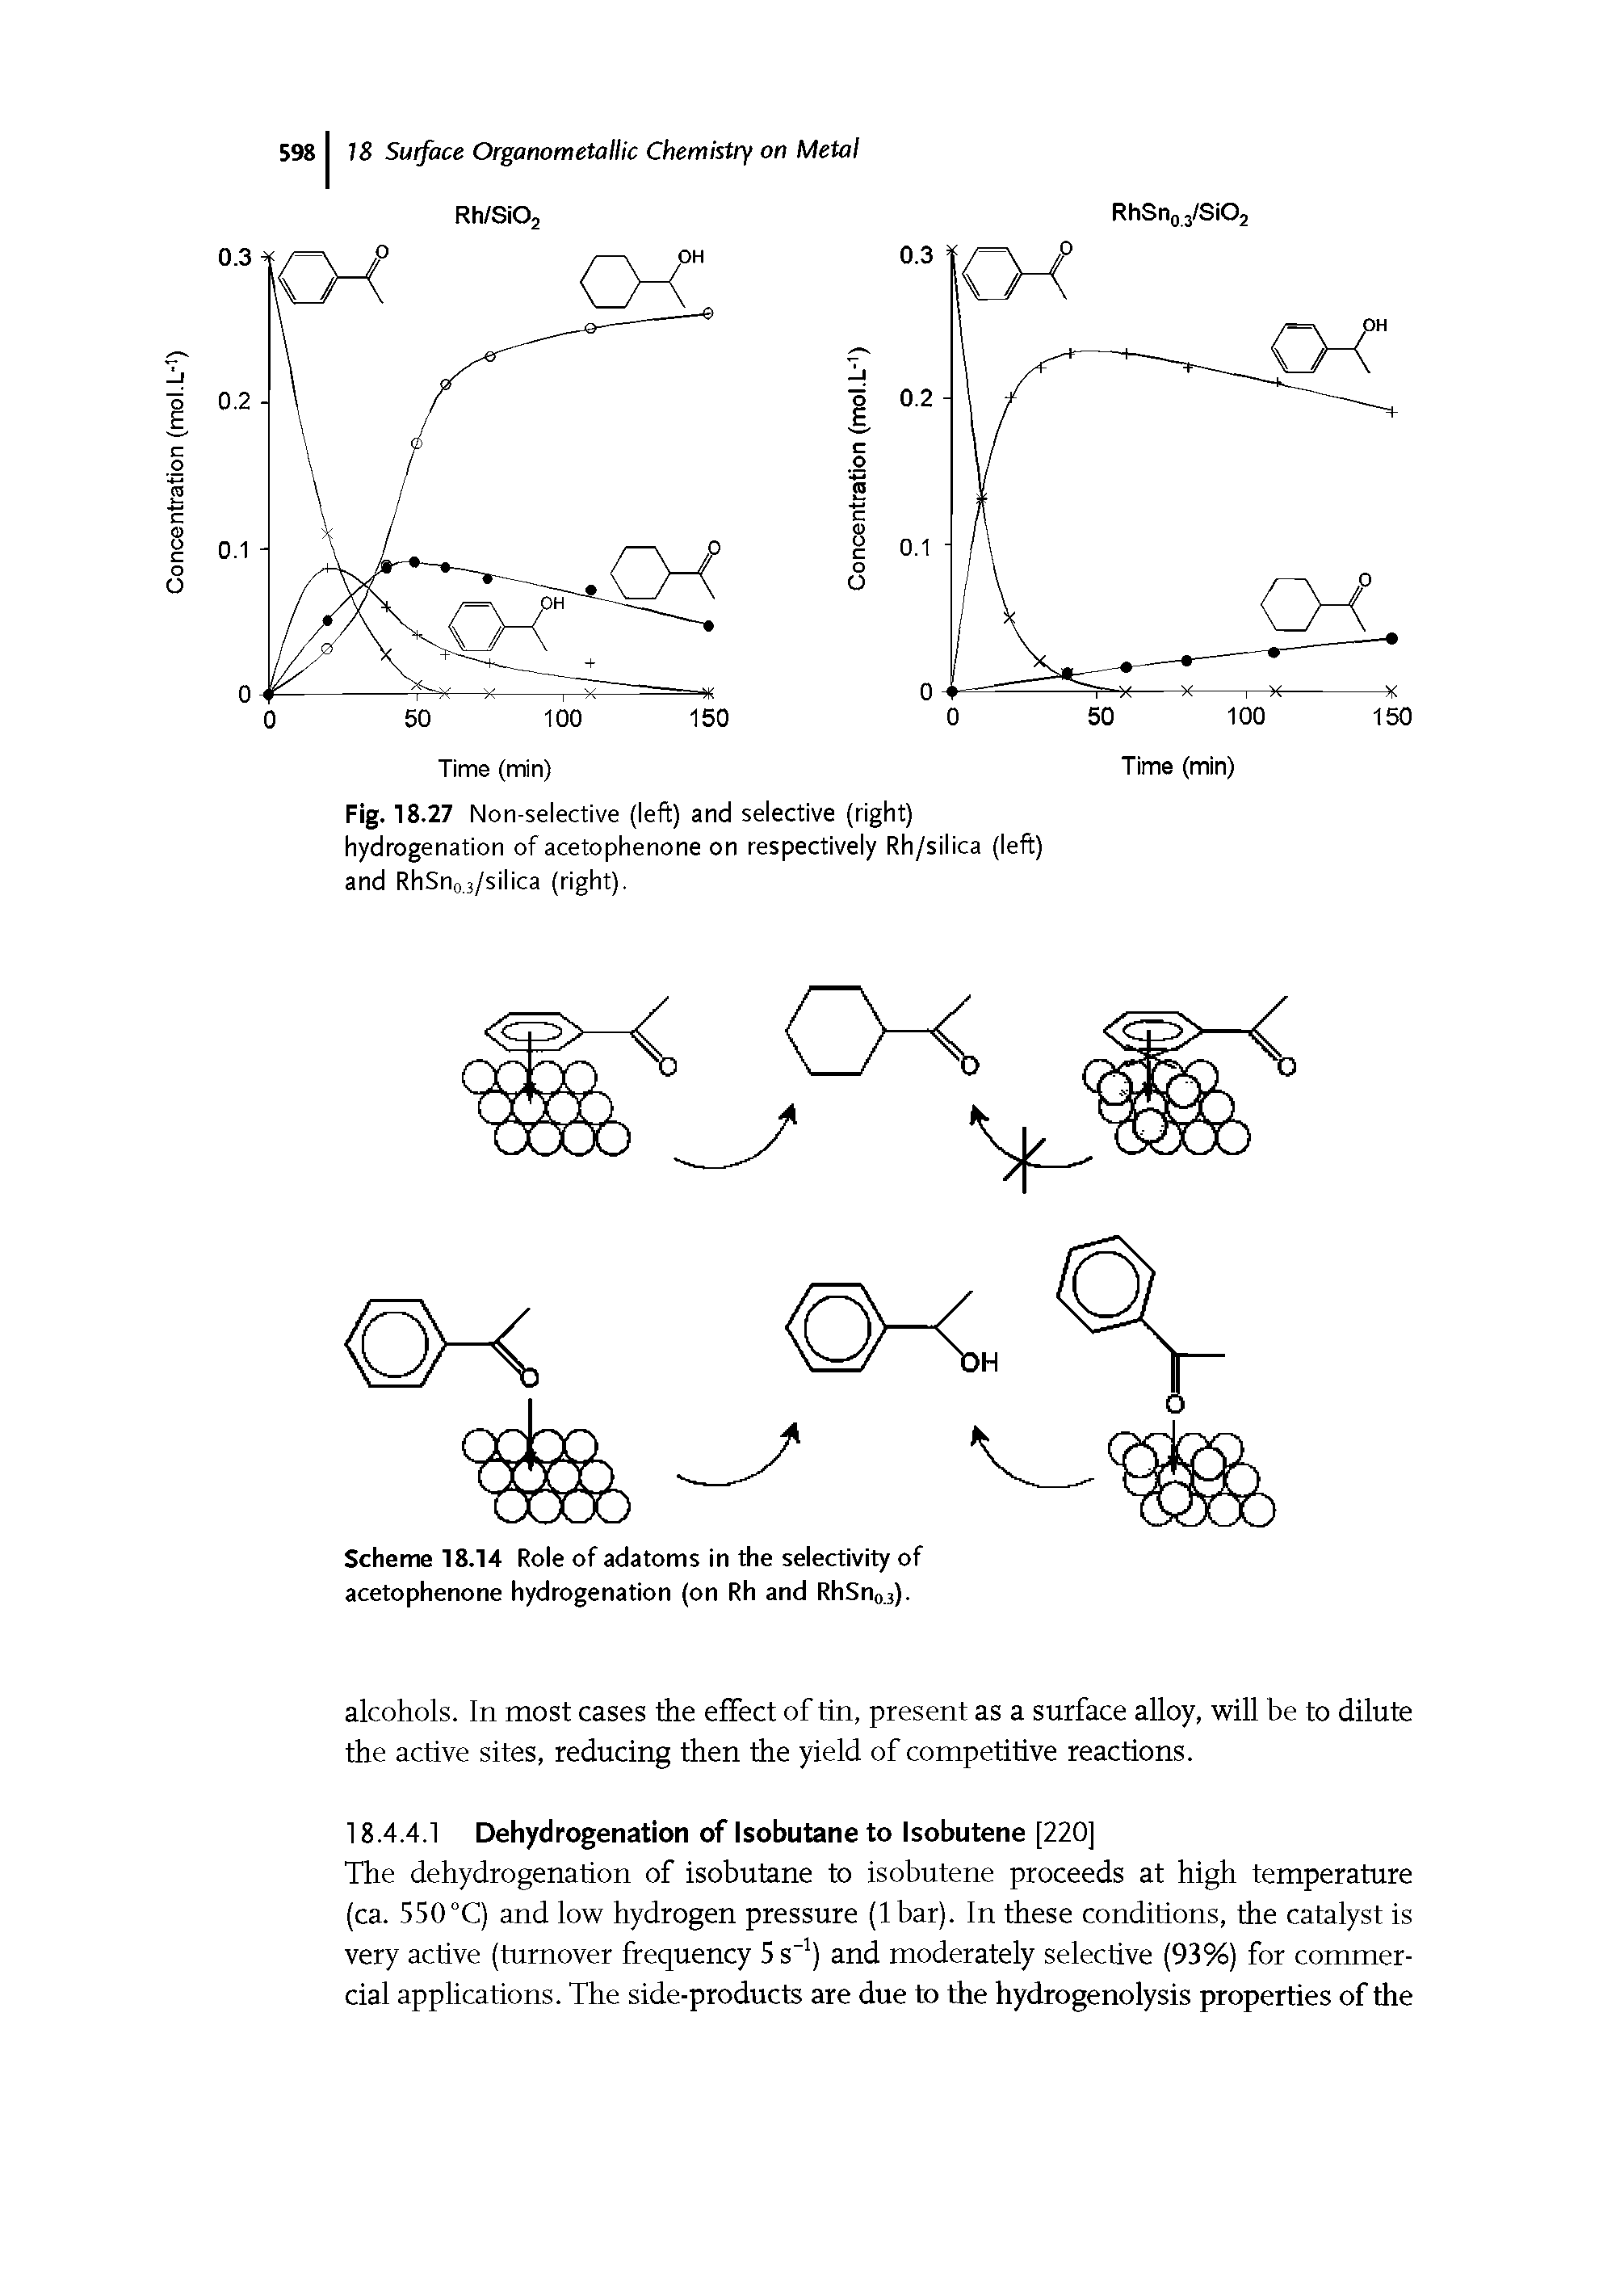 Scheme 18.14 Role of adatoms in the selectivity of acetophenone hydrogenation (on Rh and RhSnoj).